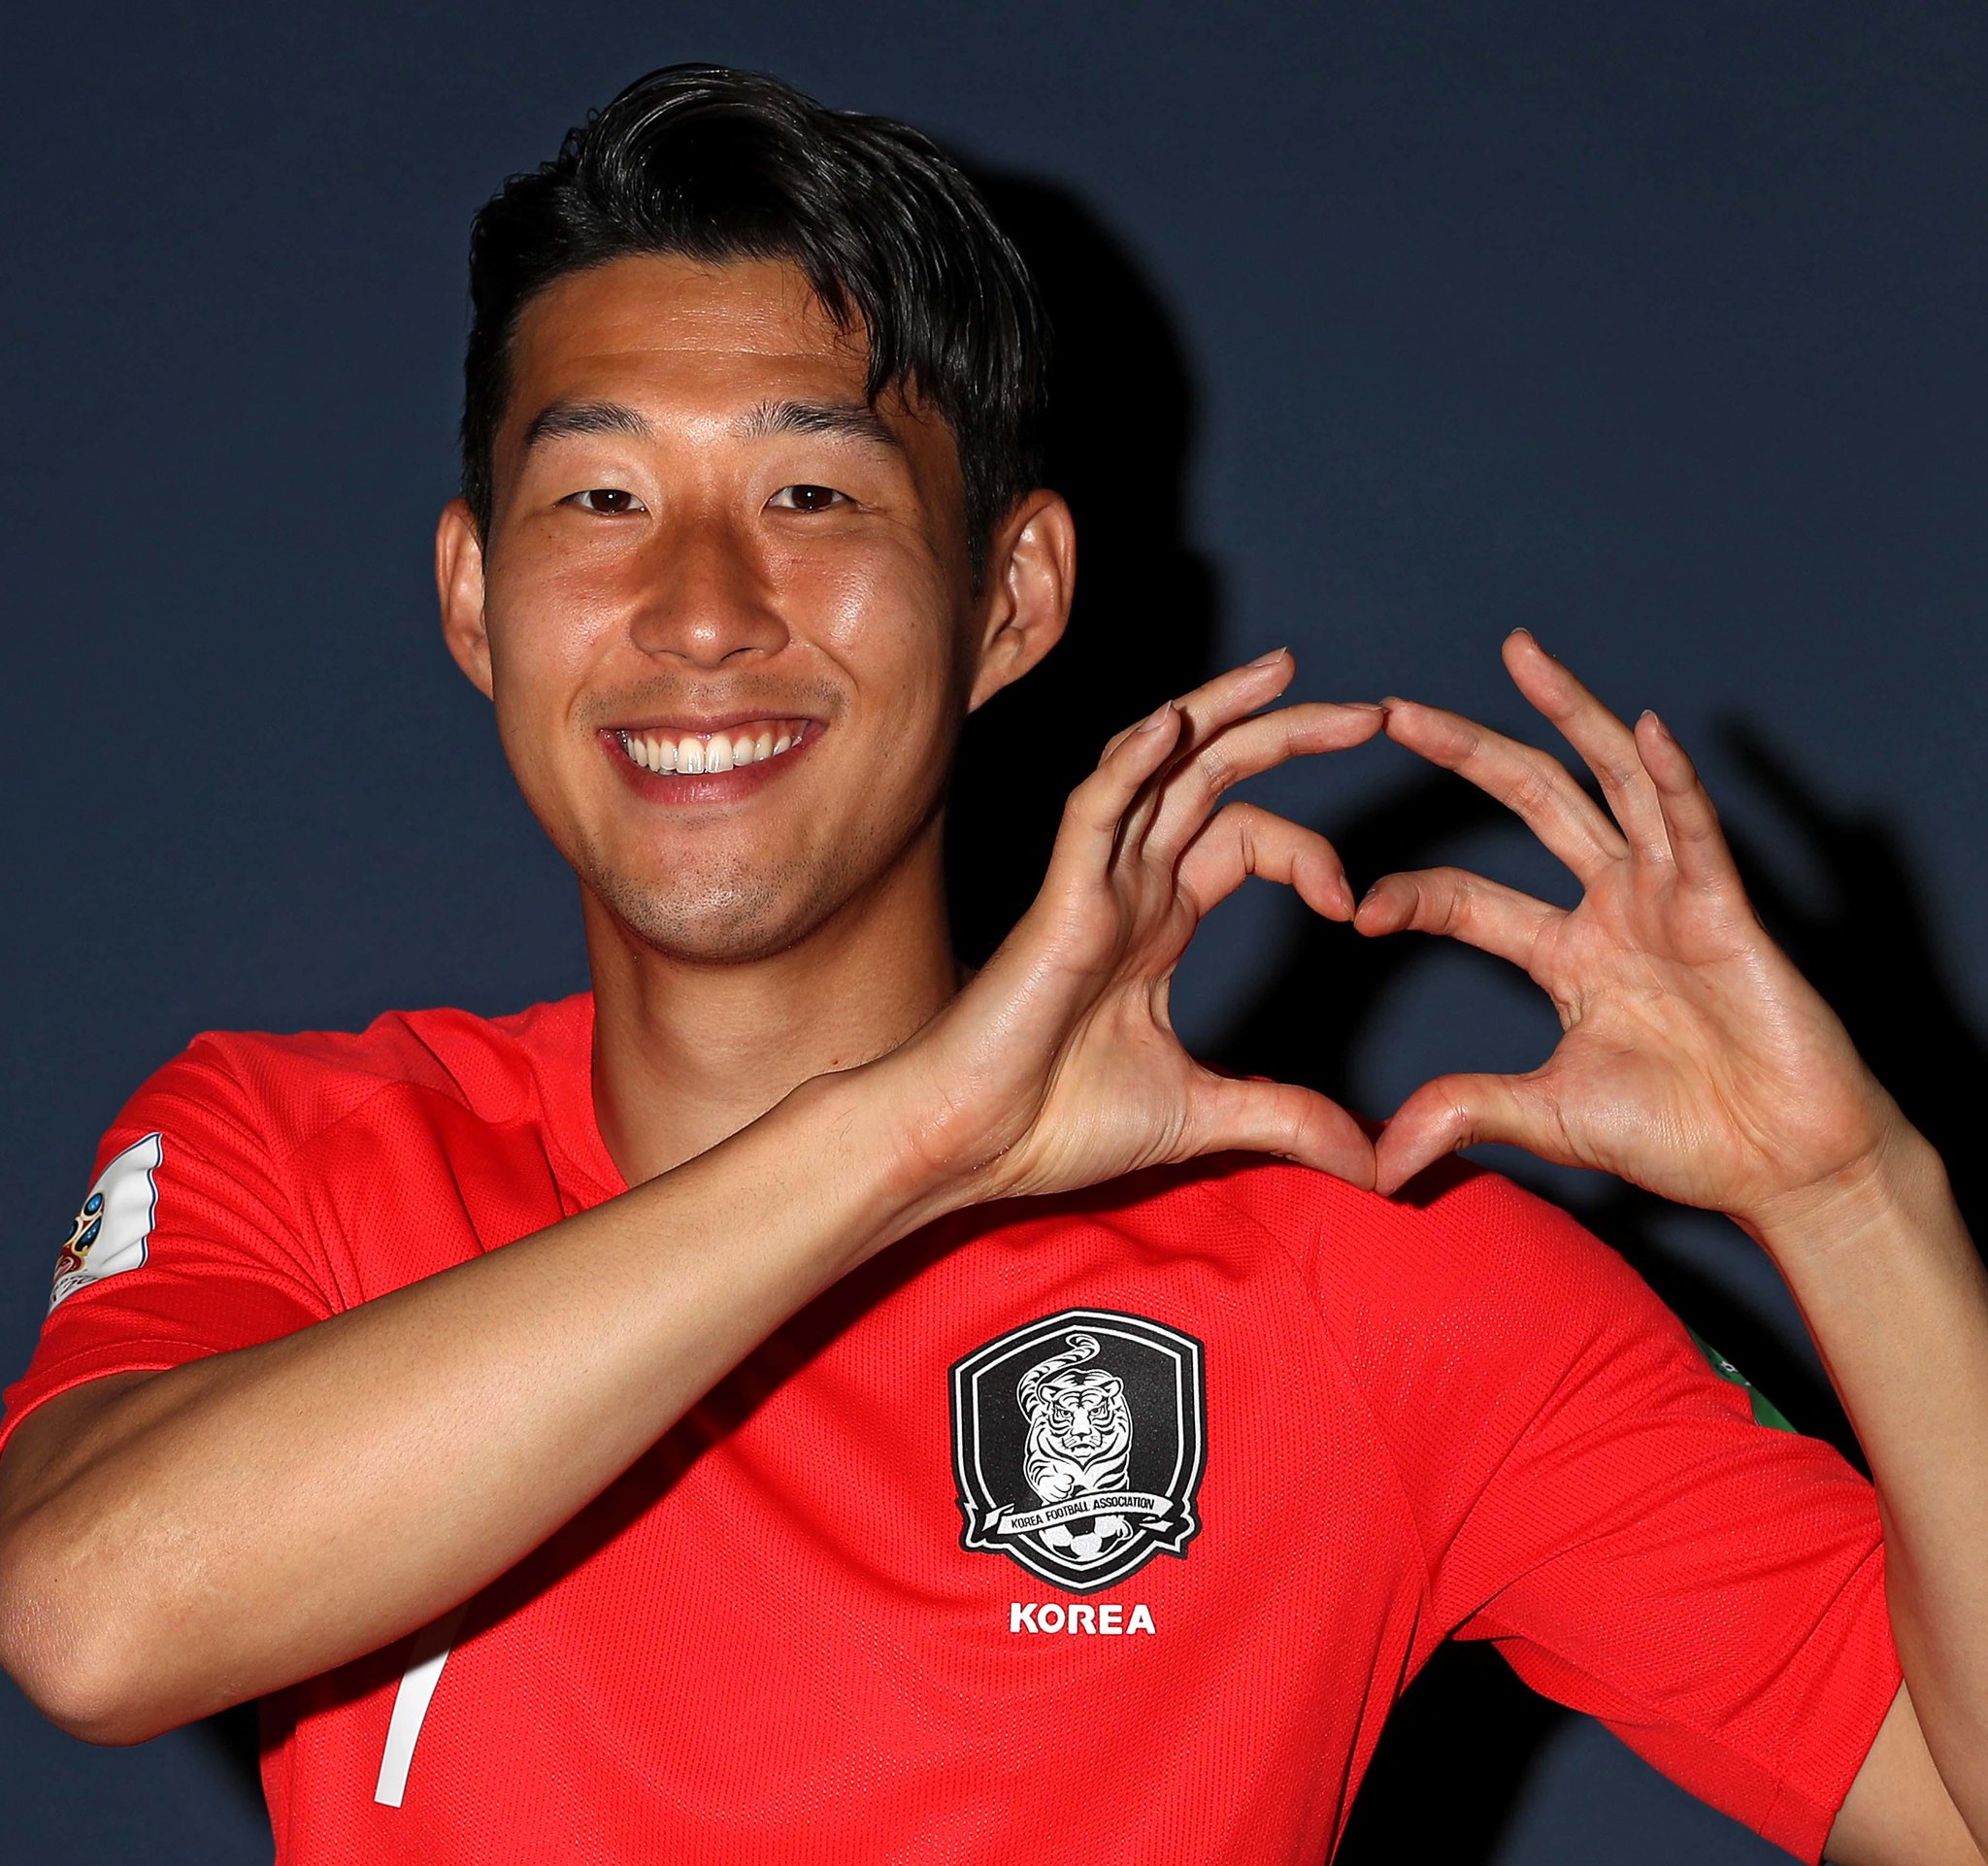 Happy birthday Son Heung-min! 

The AFC Asian International Player Of The Year 2017 turns 26 today. 